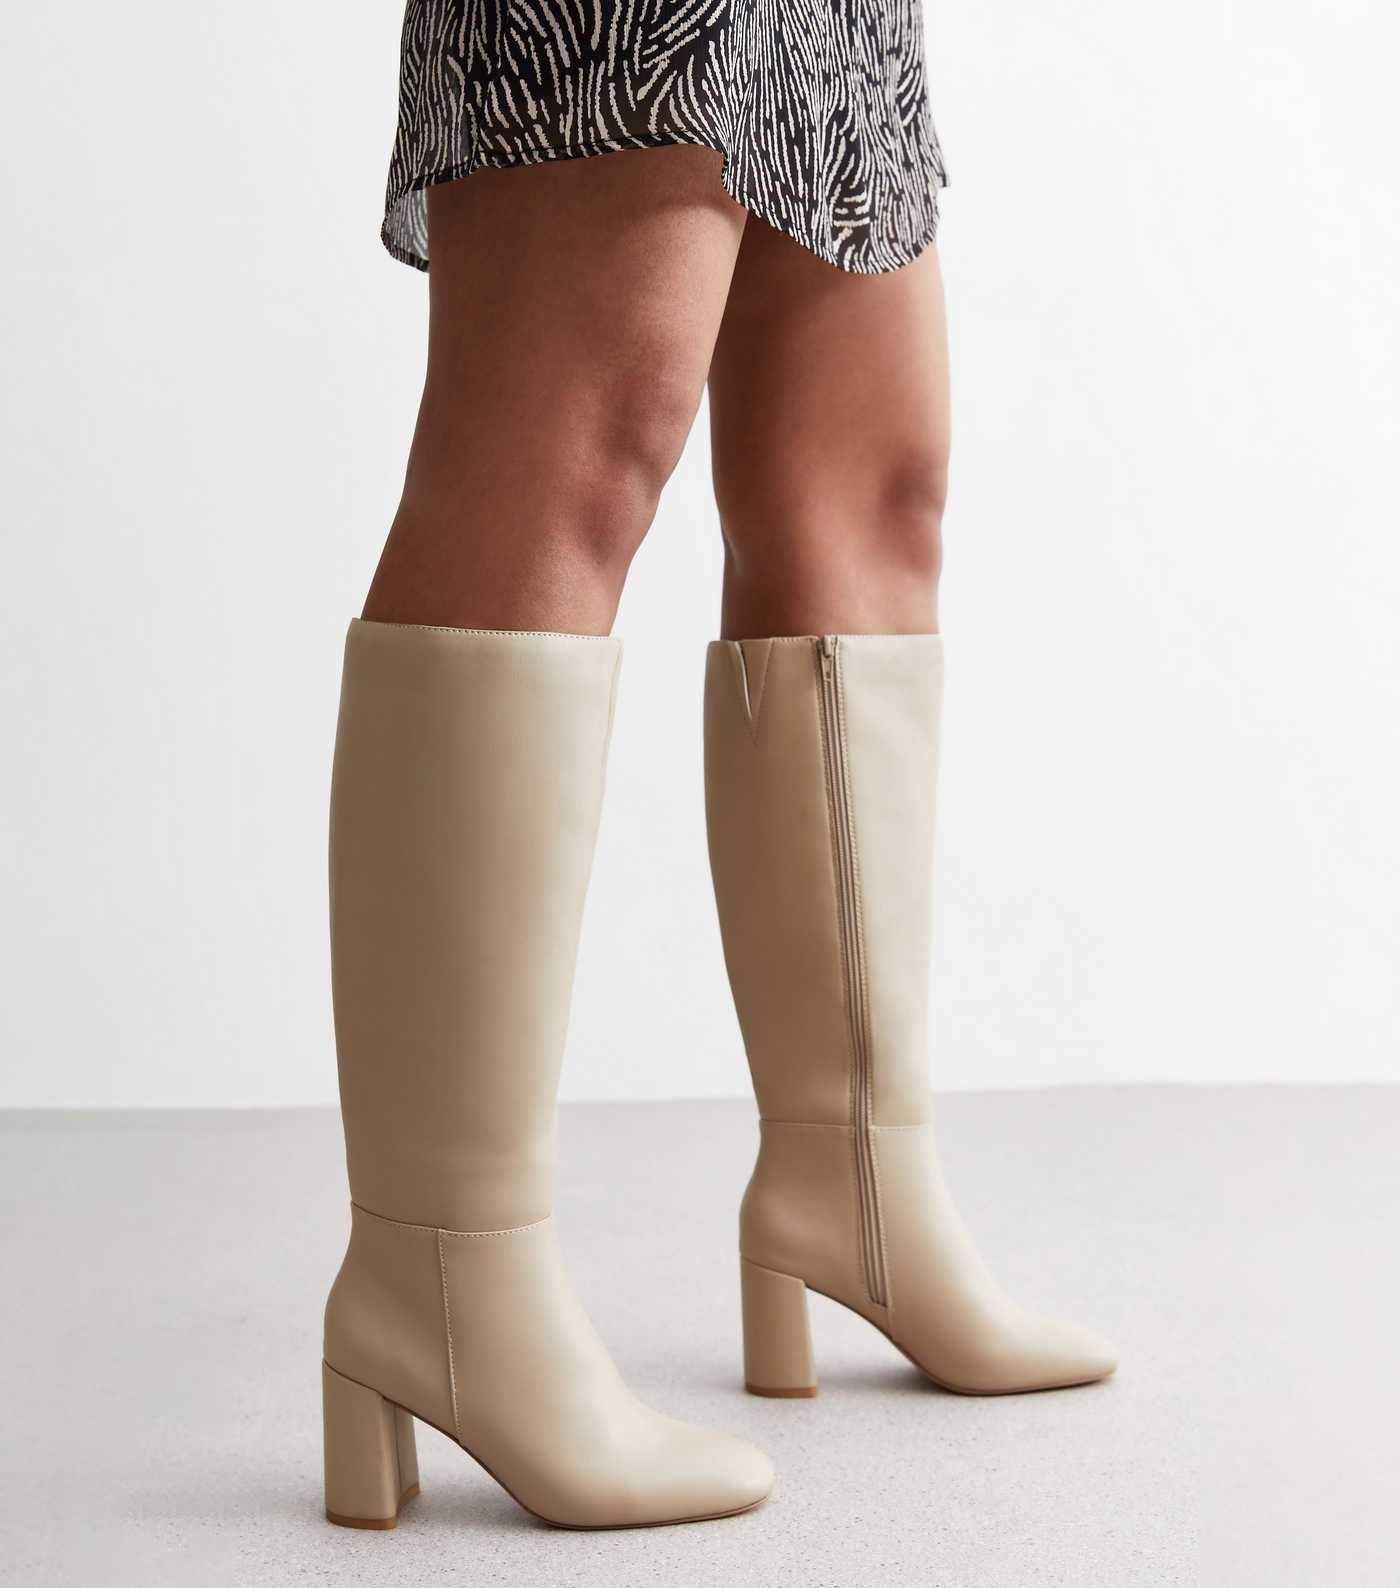 Camel Leather-Look Stretch Block Heel Knee High Boots
						
						Add to Saved Items
						Remov... | New Look (UK)